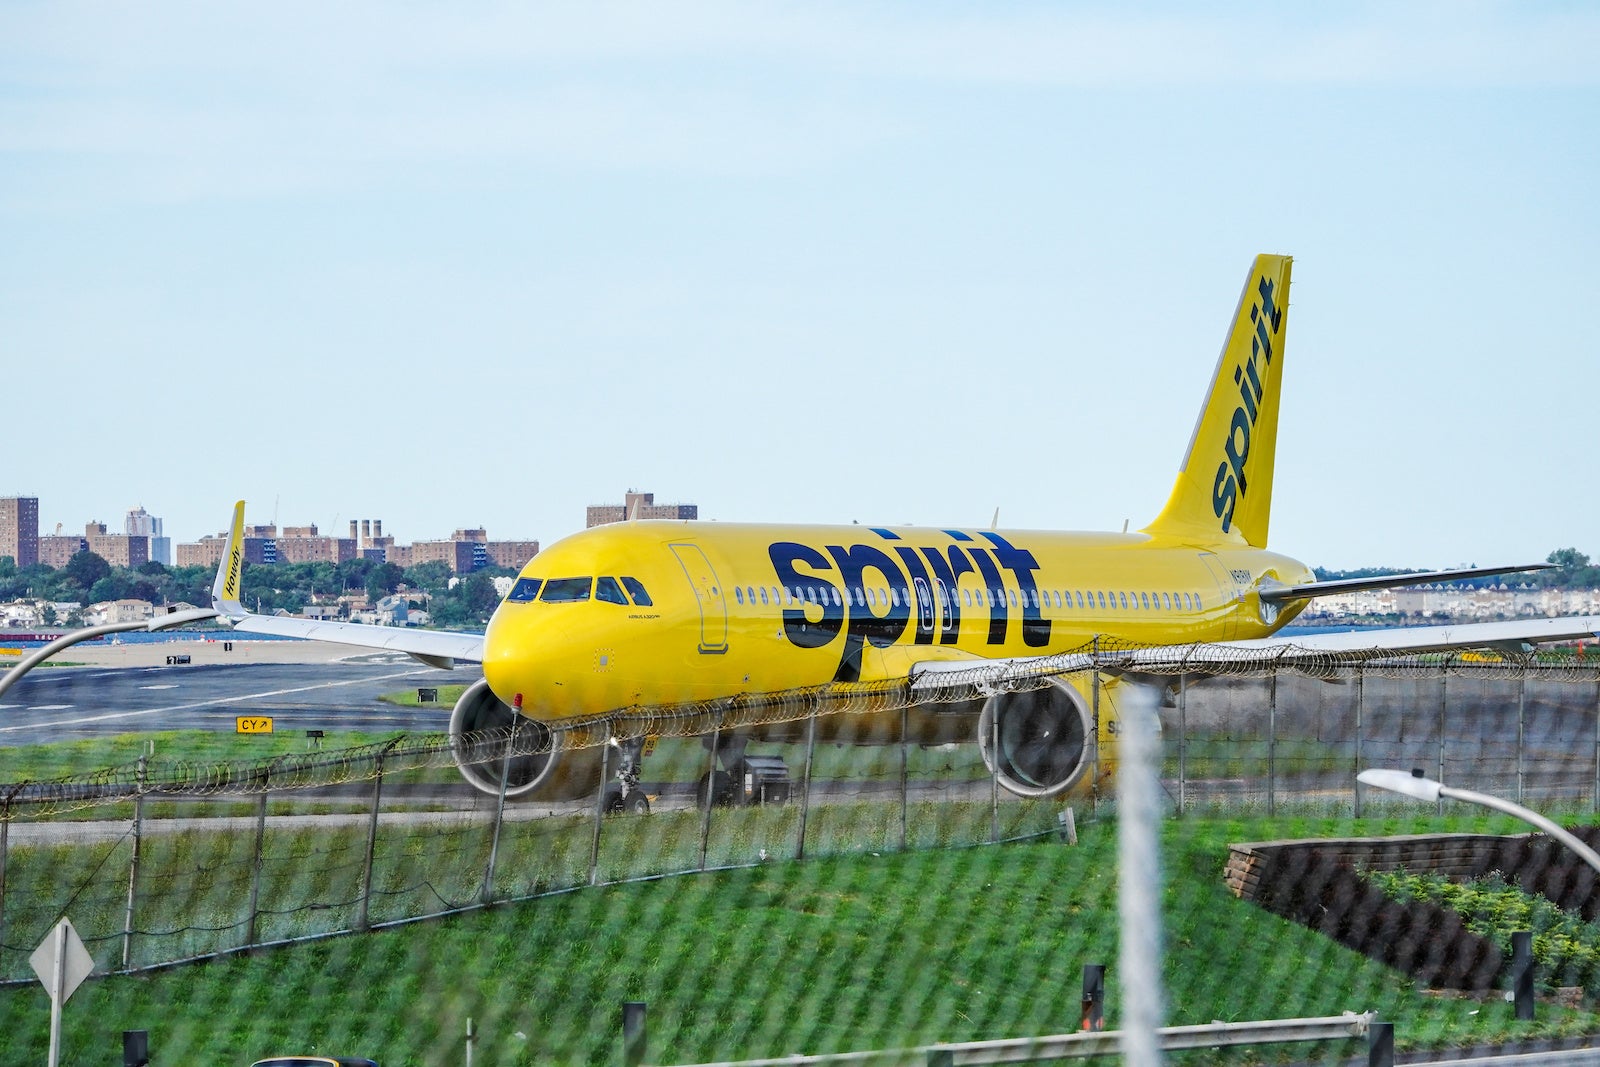 Spirit Airlines jet on the runway at New York LaGuardia Airport